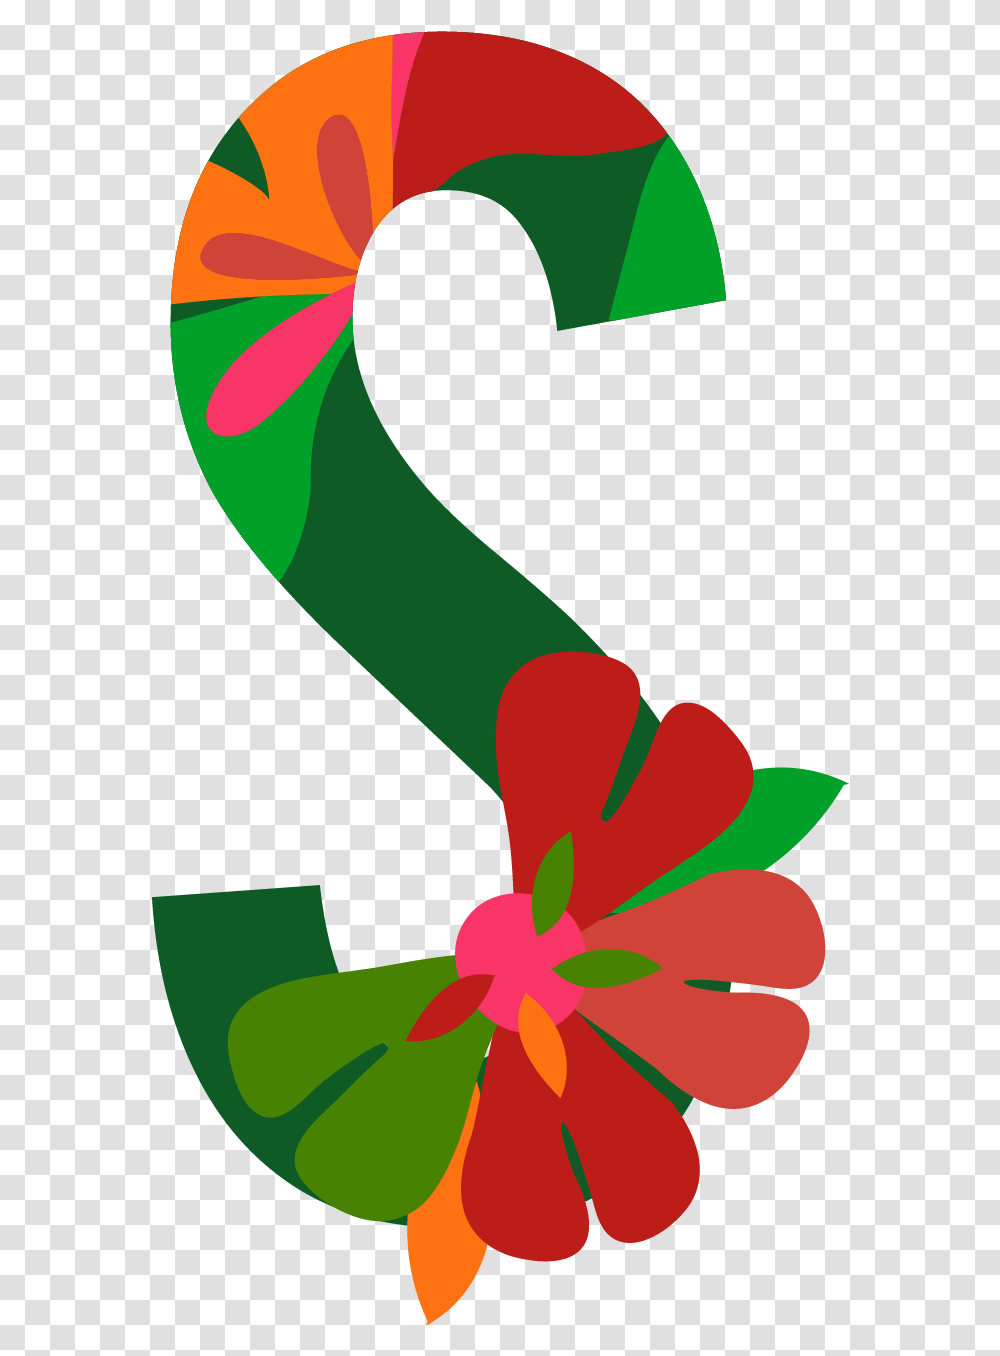 Letter S Image Play S Letter Flower, Gift, Christmas Stocking Transparent Png